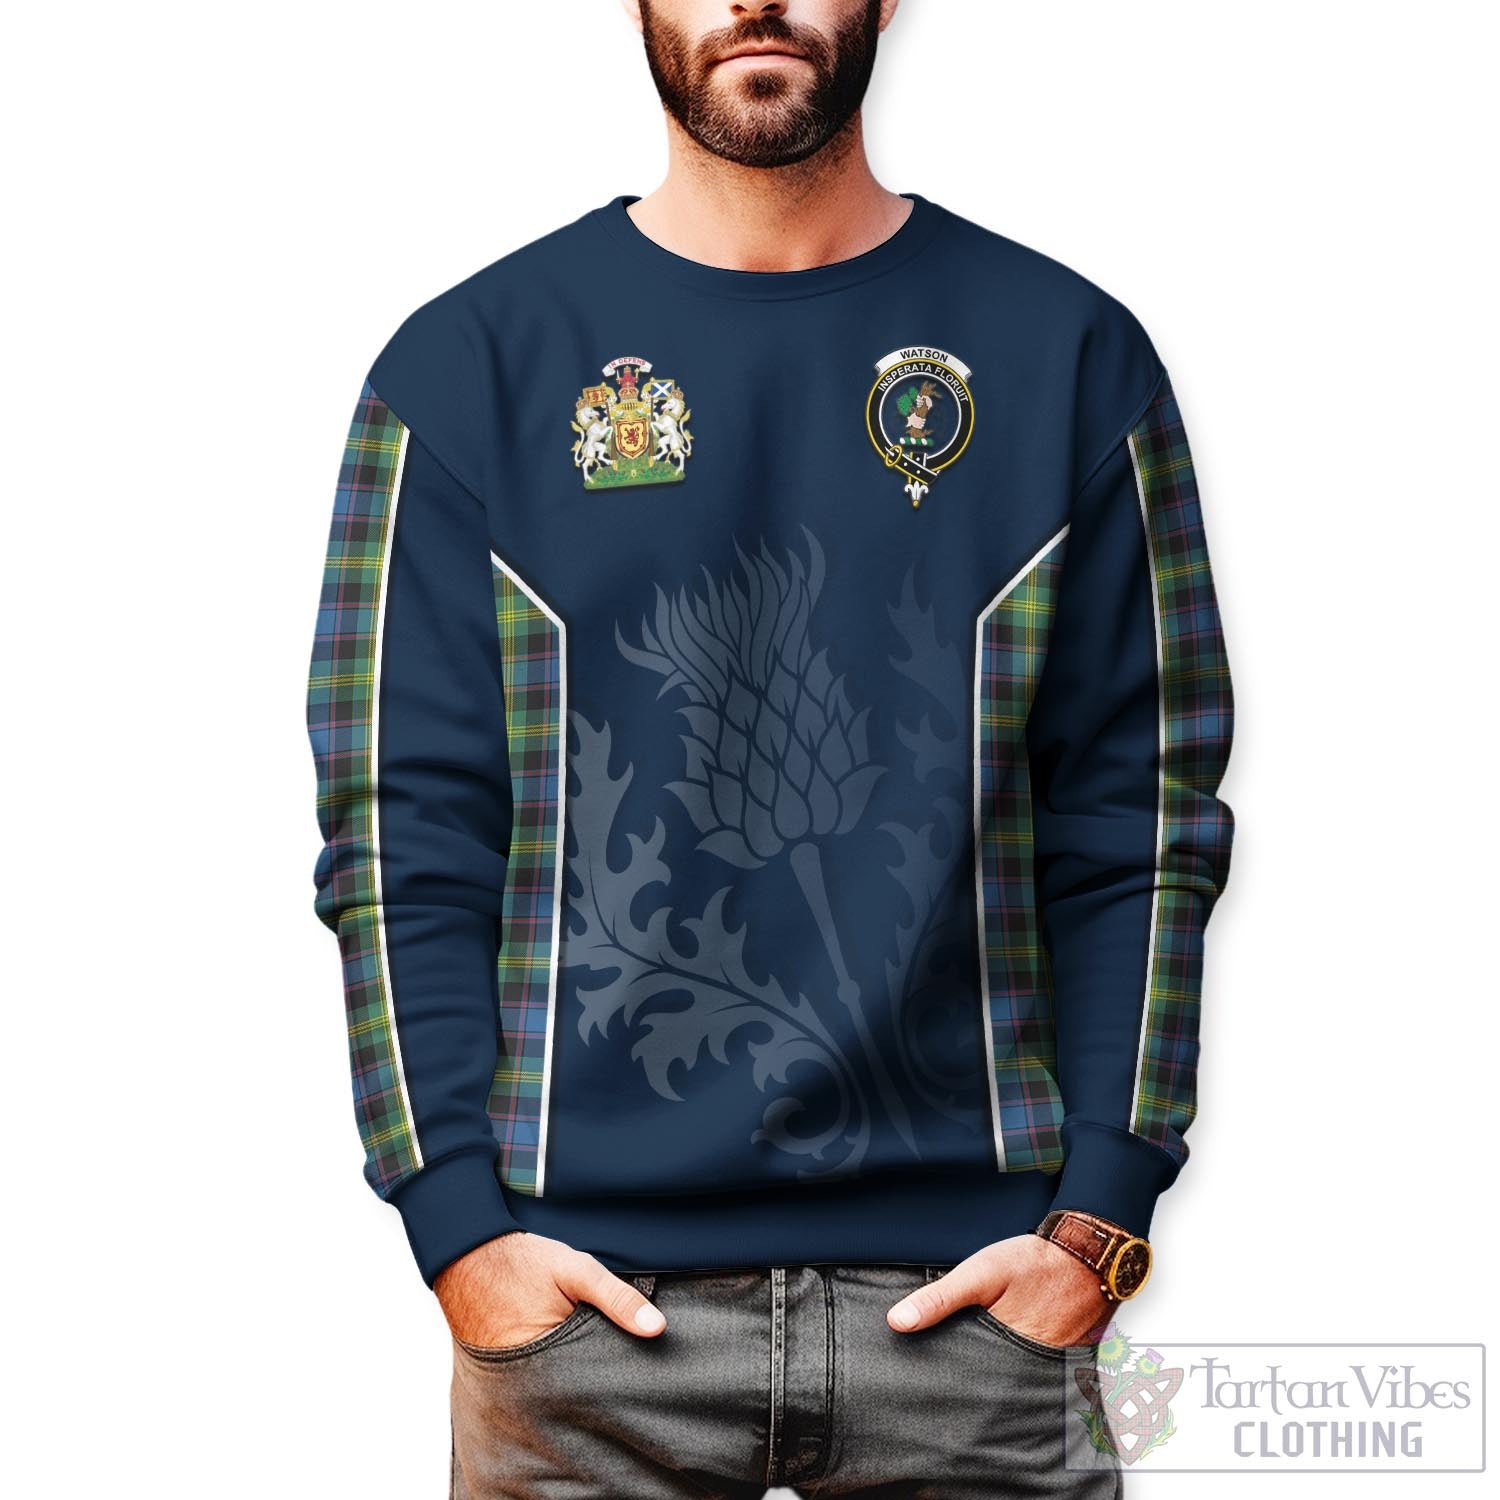 Tartan Vibes Clothing Watson Ancient Tartan Sweatshirt with Family Crest and Scottish Thistle Vibes Sport Style